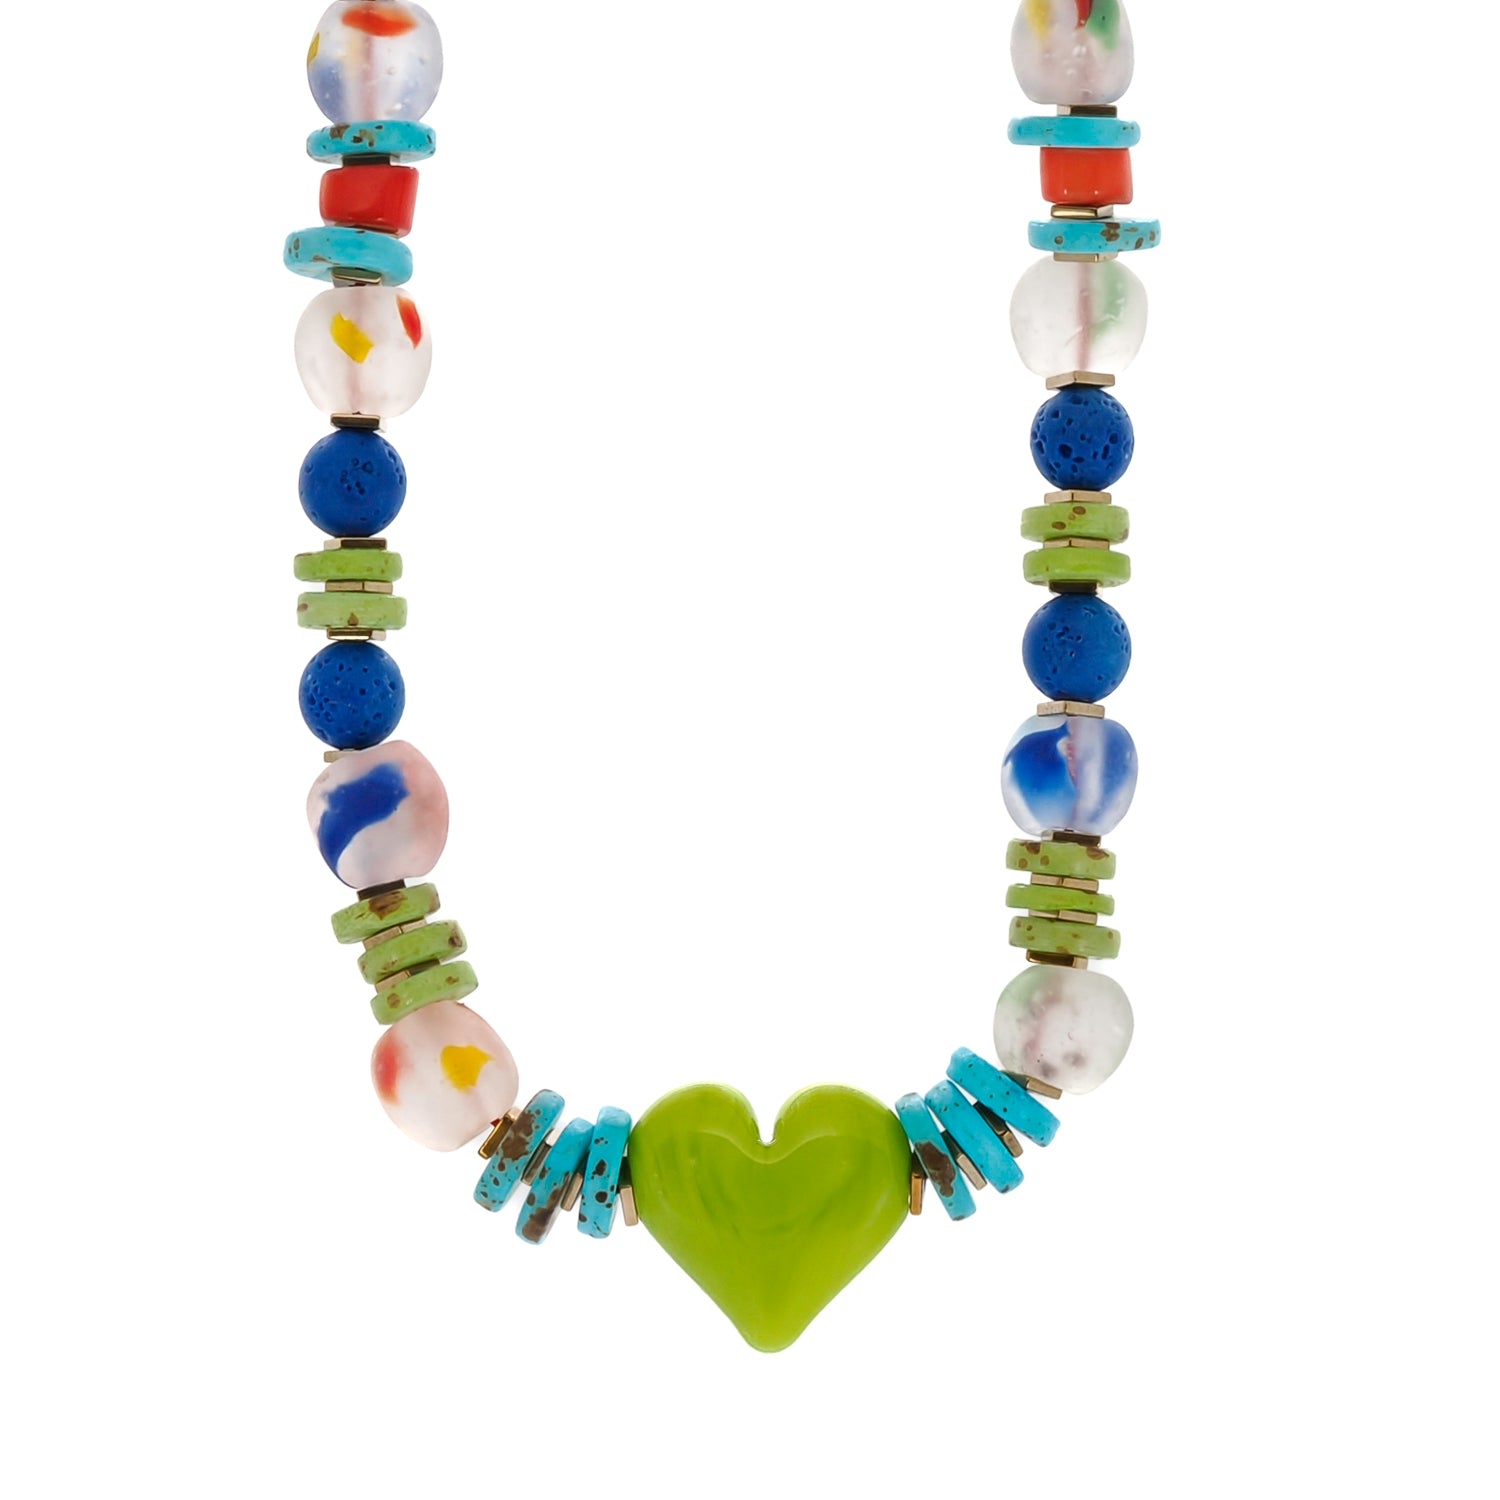 Crafted with Care: Green Ceramic Heart Pendant on Beaded Necklace